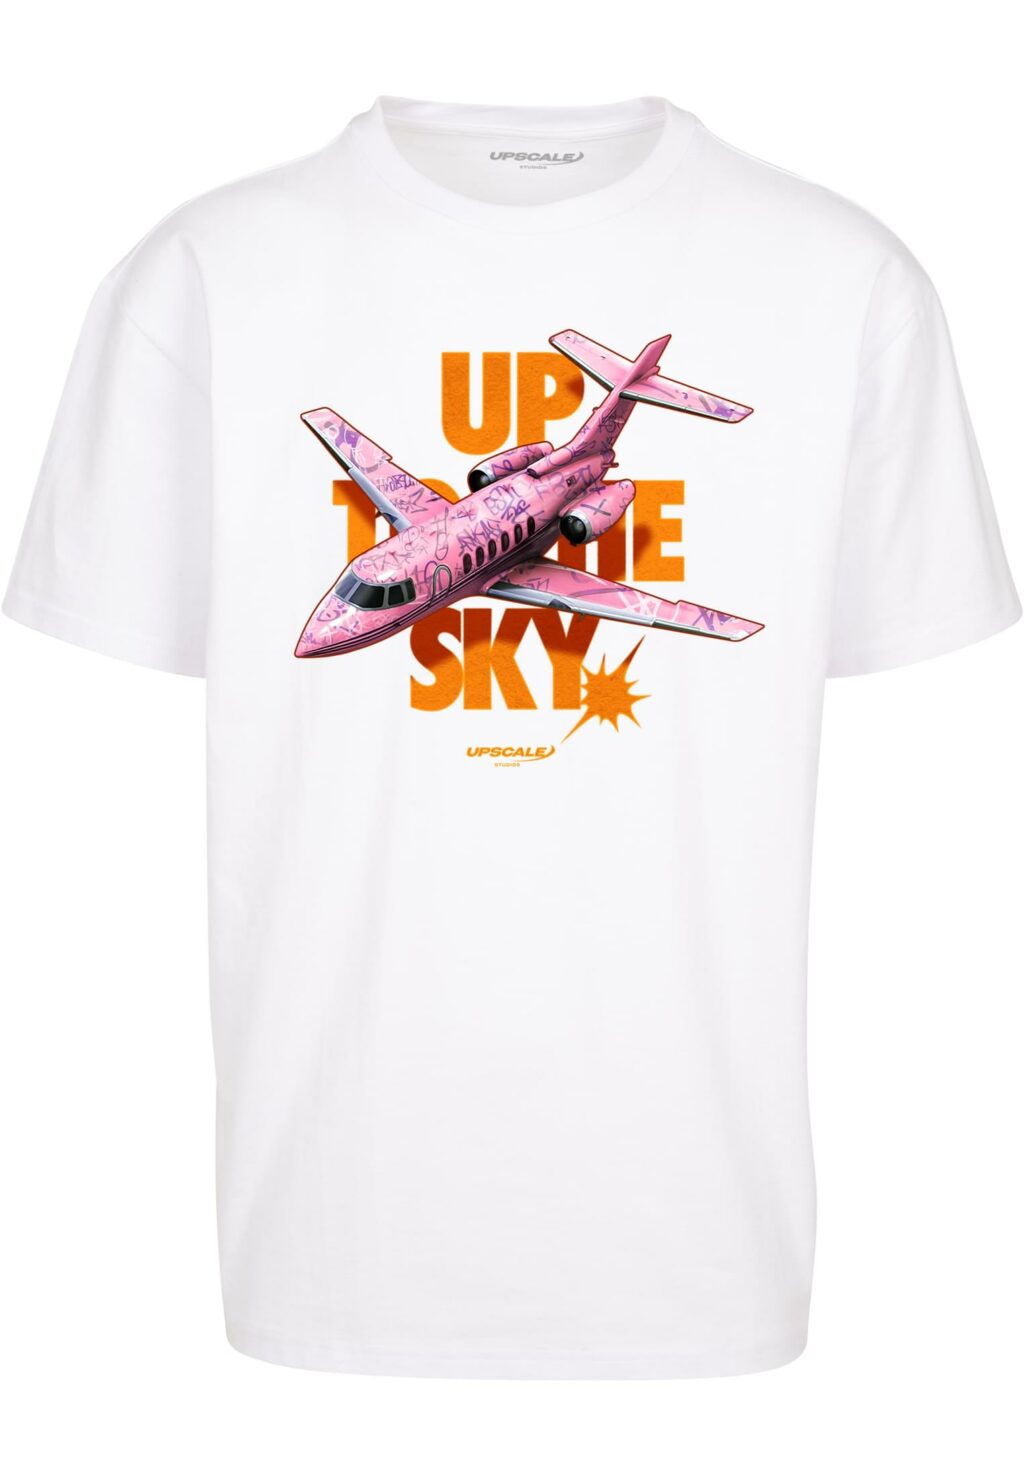 Up to the Sky Oversize Tee white MT2737